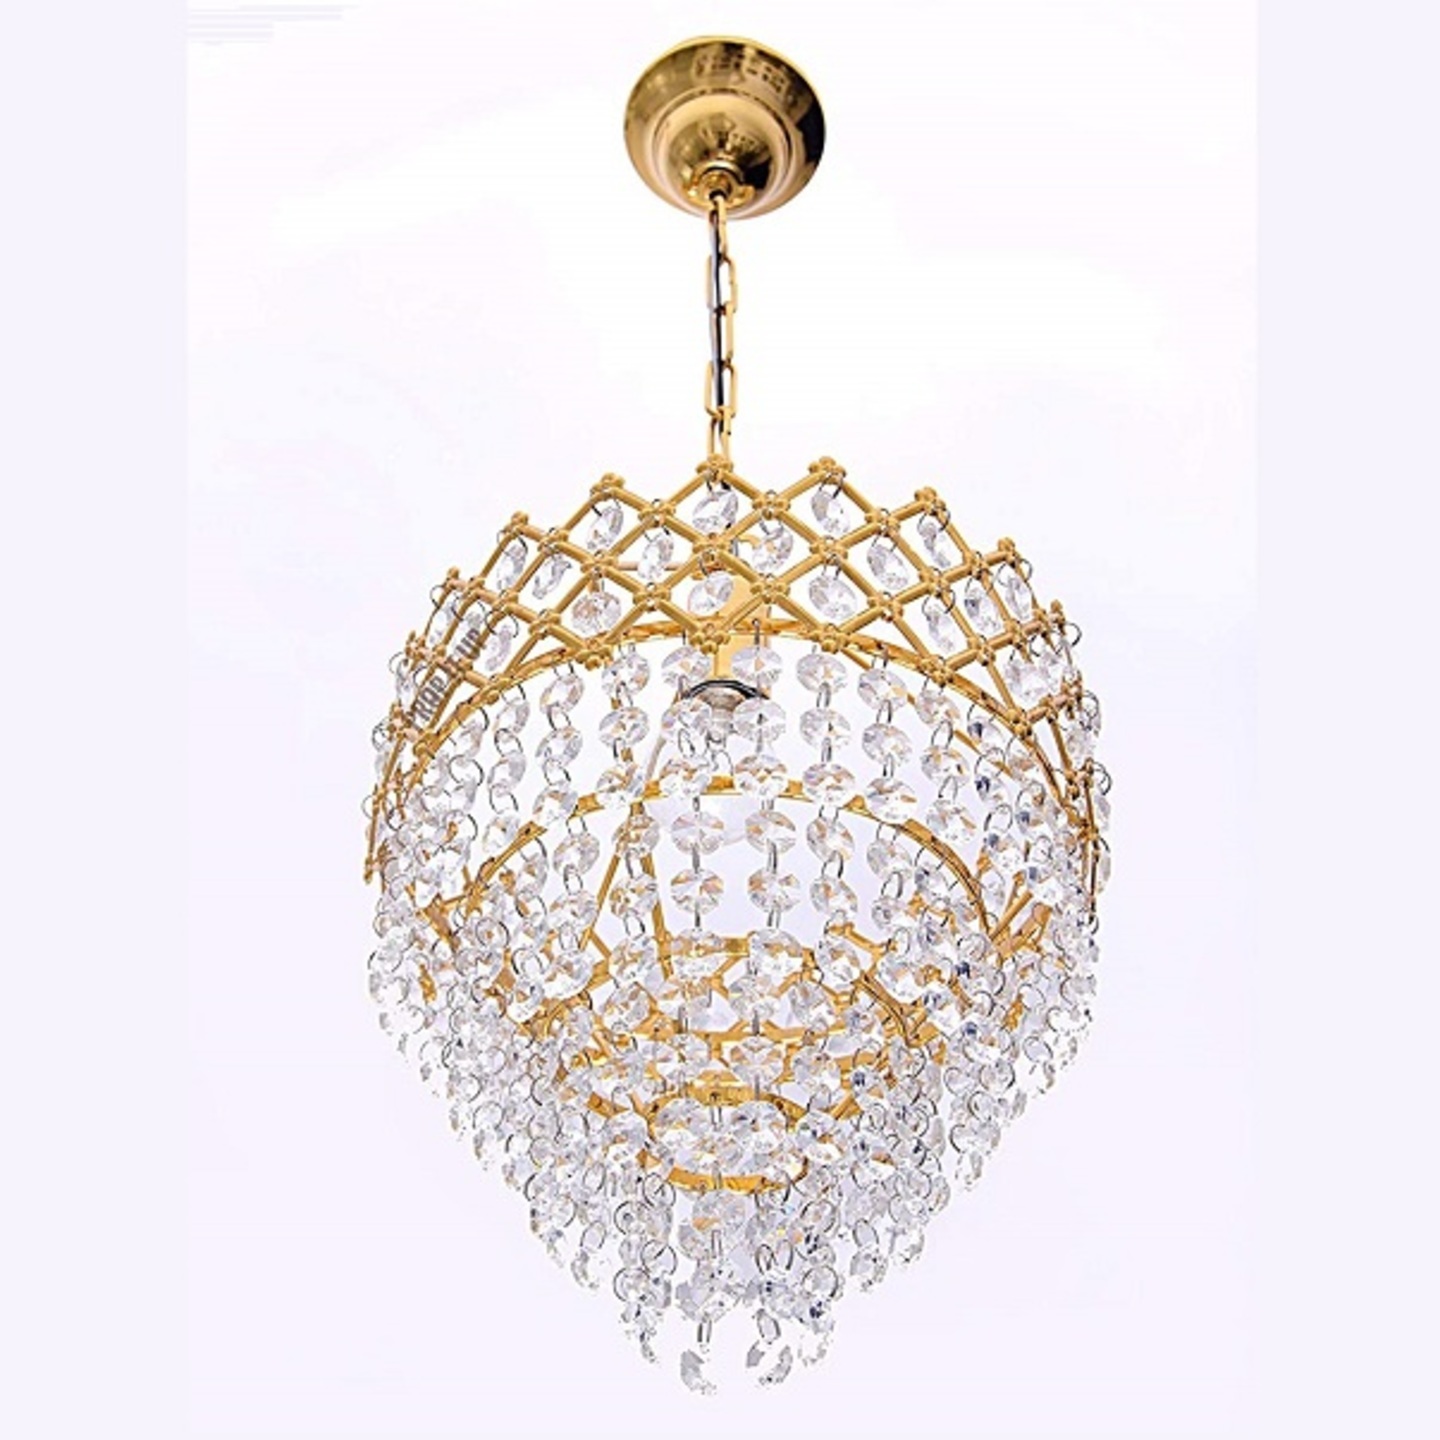 Decorative Pendant Crystal Chandelier for Living Room - 250mm Bulb included